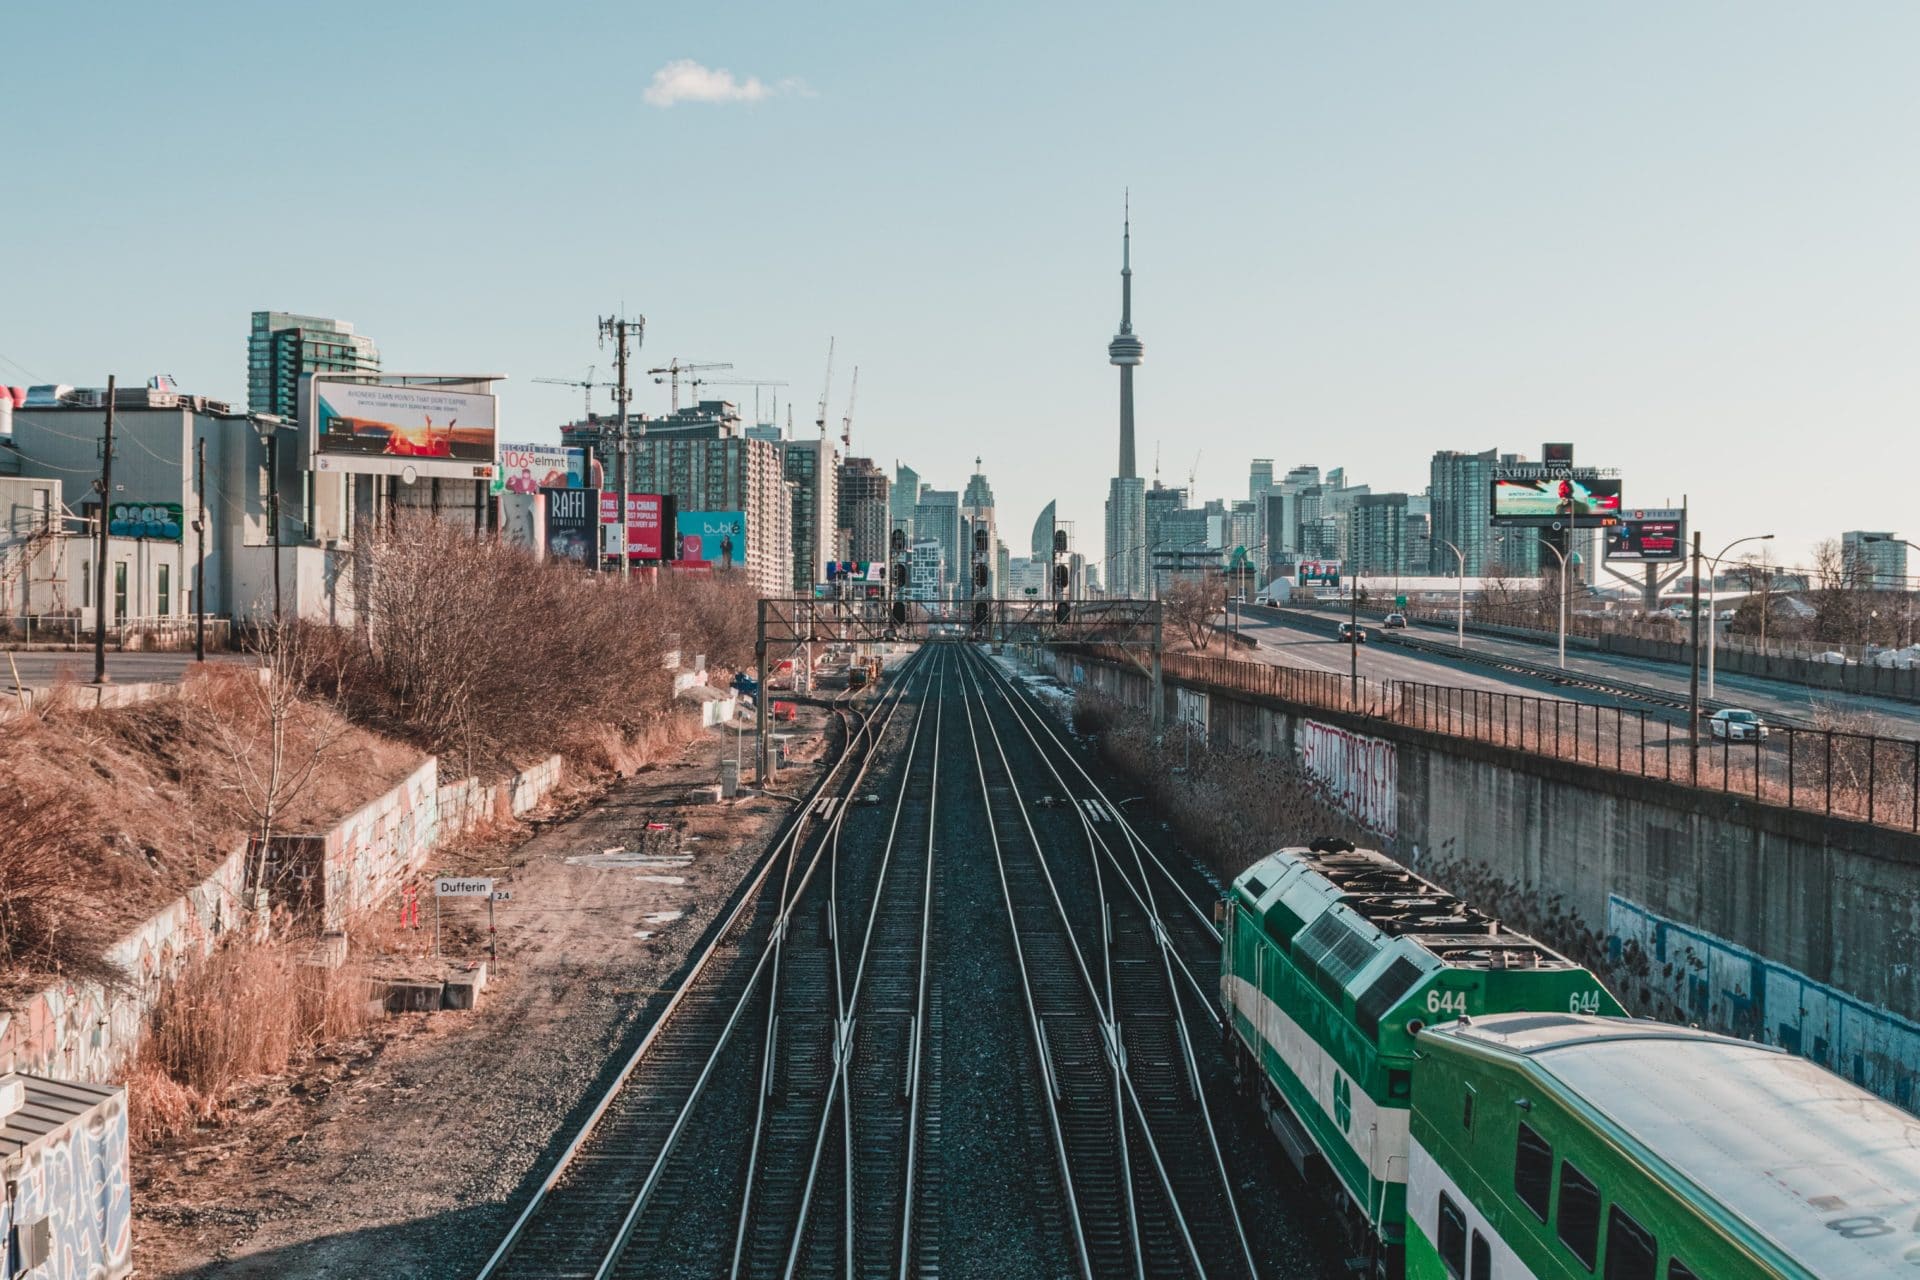 Metrolinx's GO train tracks with GO train in the foreground and CN tower in the background